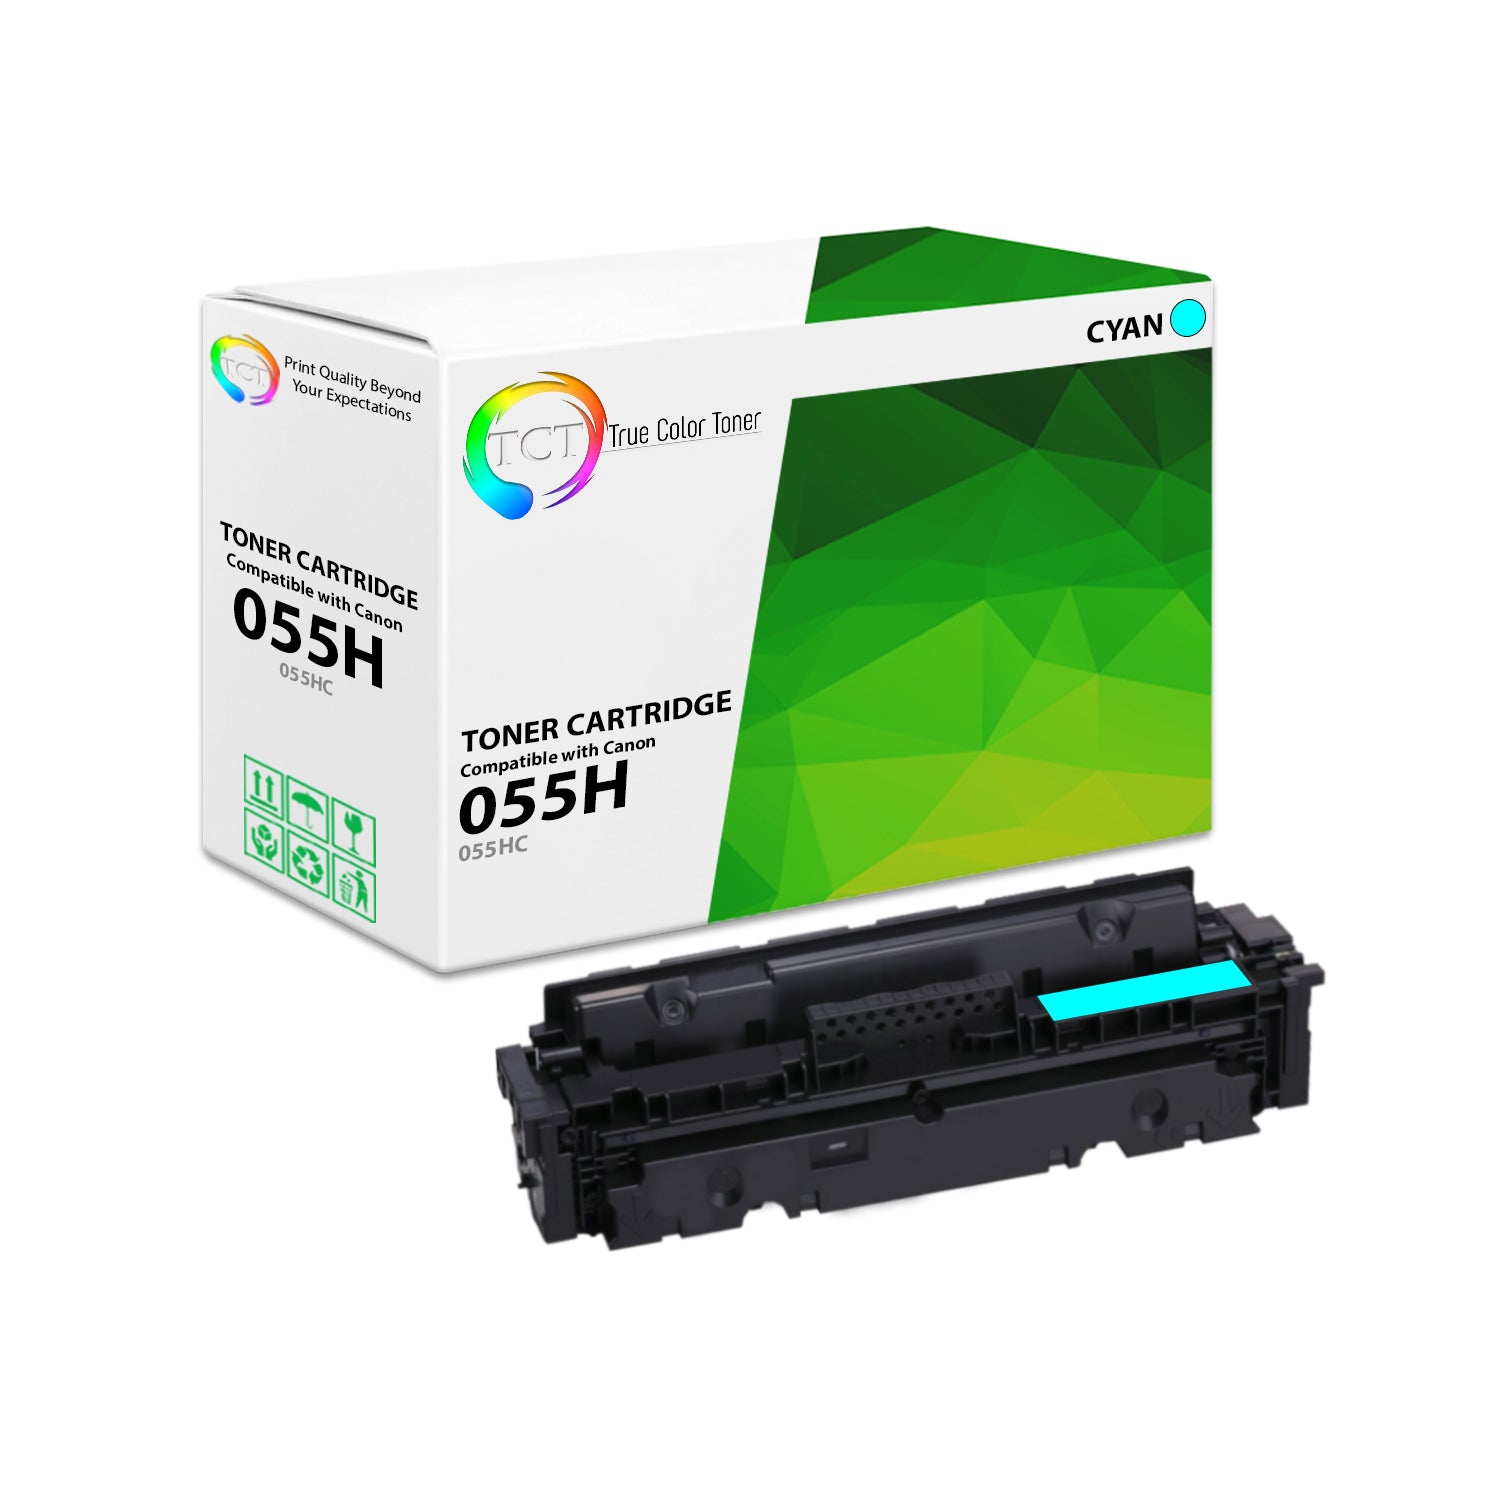 TCT Compatible High Yield Toner Cartridge Replacement for the Canon 055H Series - 1 Pack Cyan